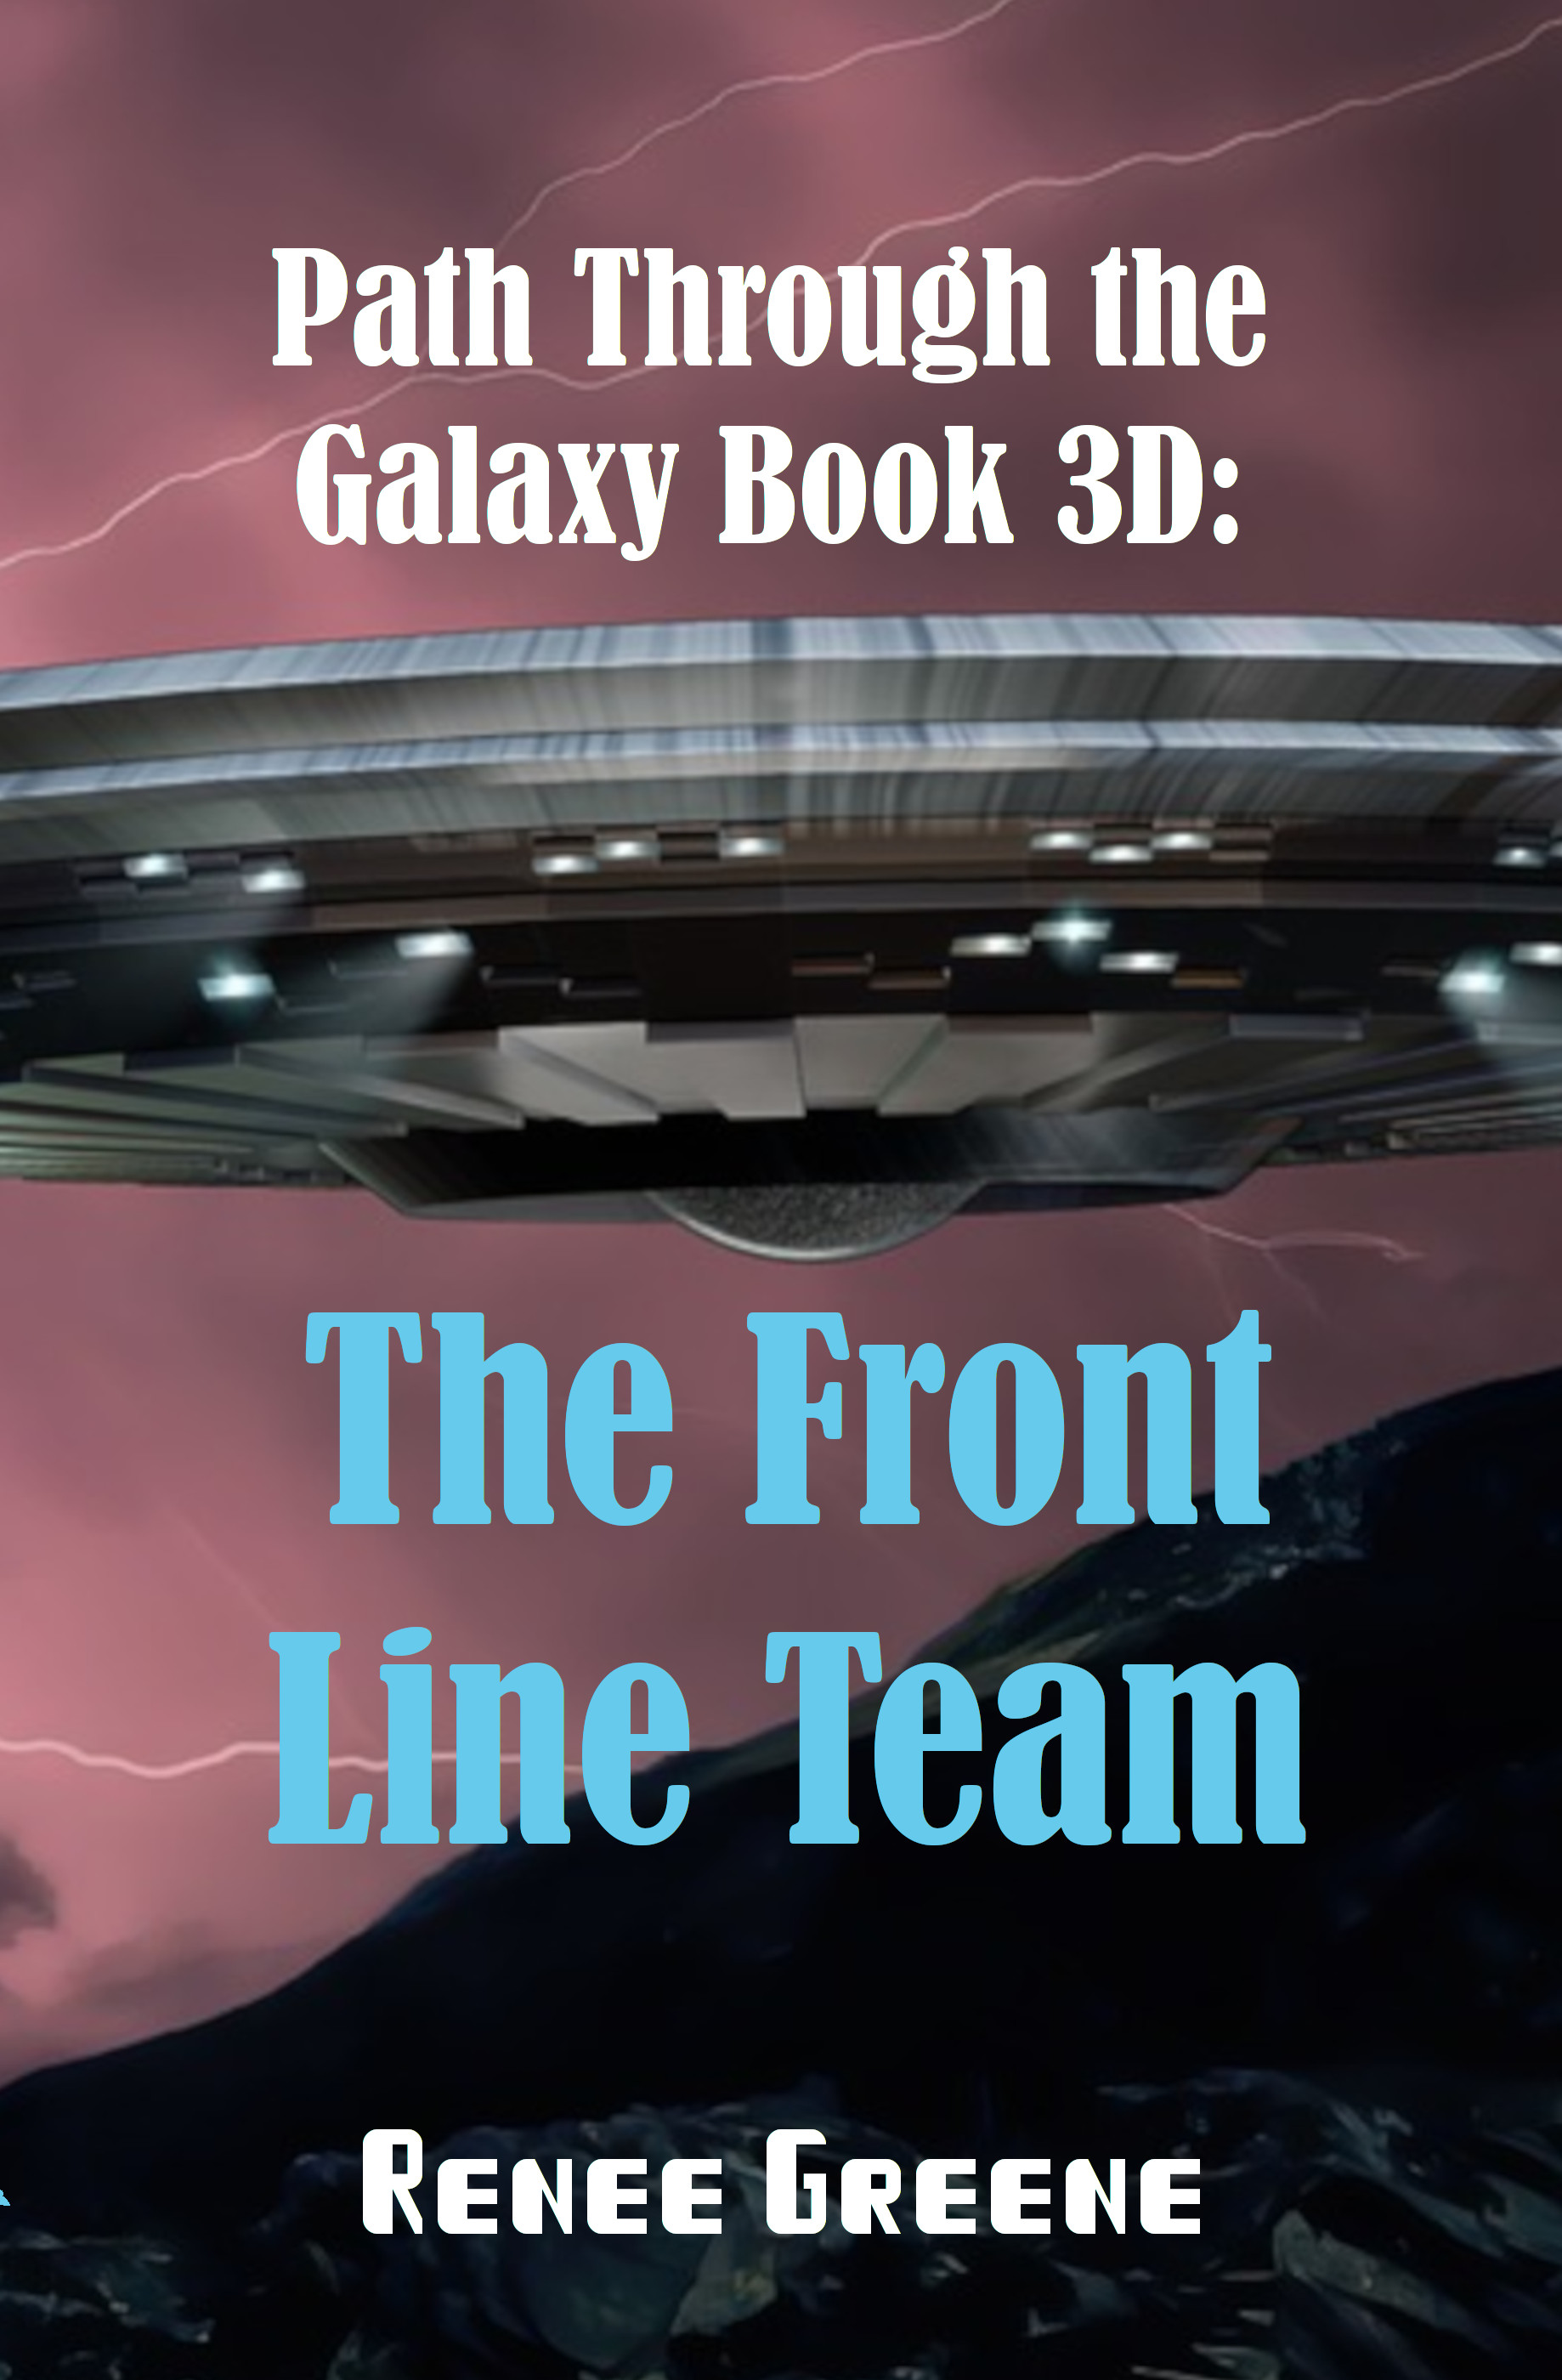 Path Through the Galaxy Book 3D: The Front-Line Team